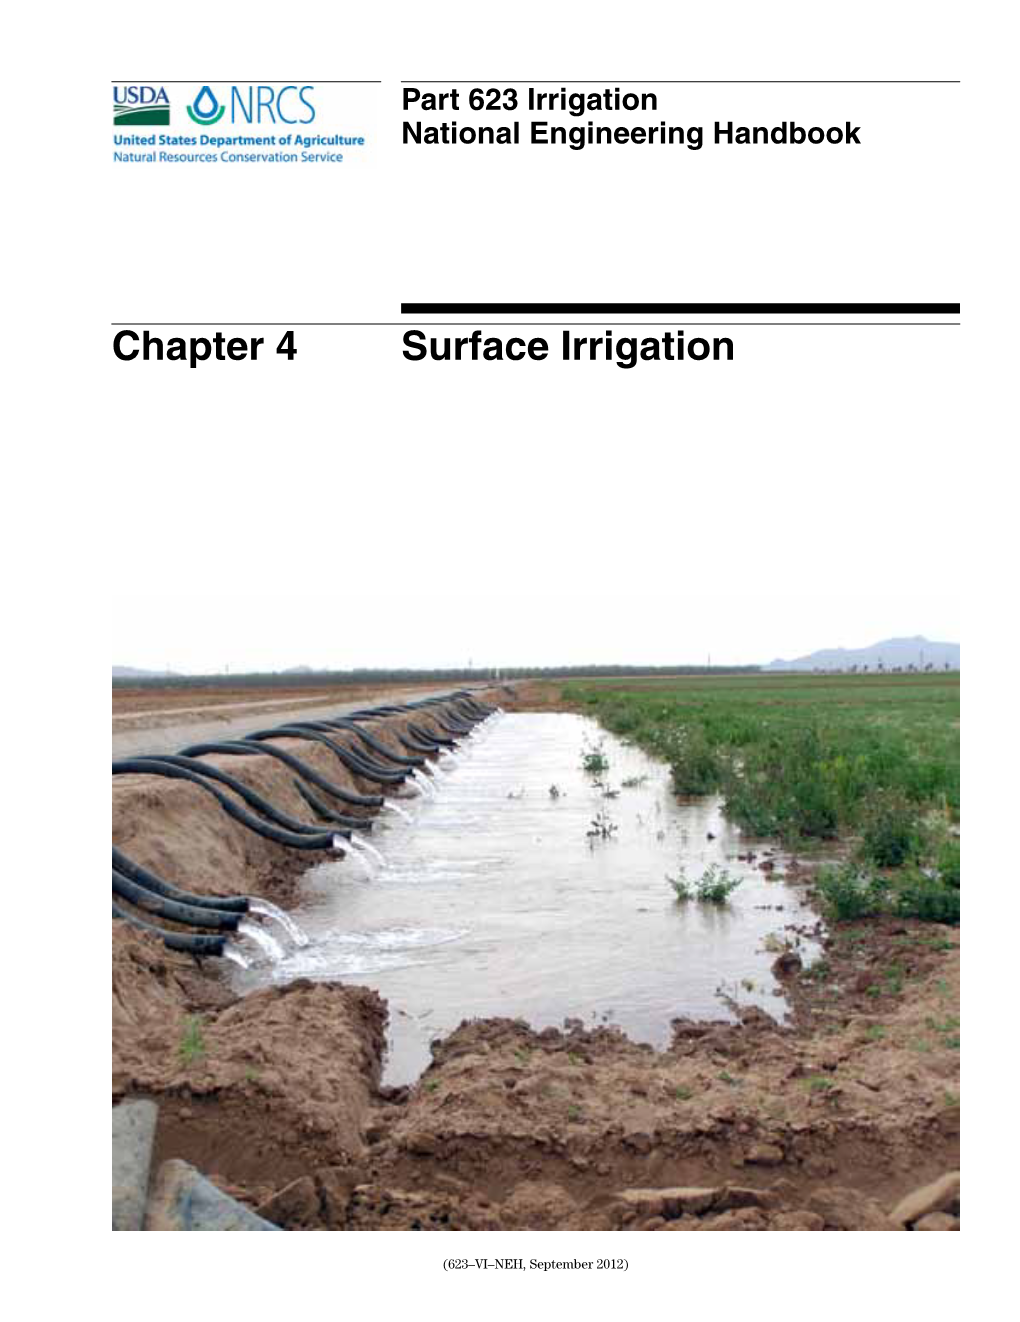 Chapter 4 Surface Irrigation